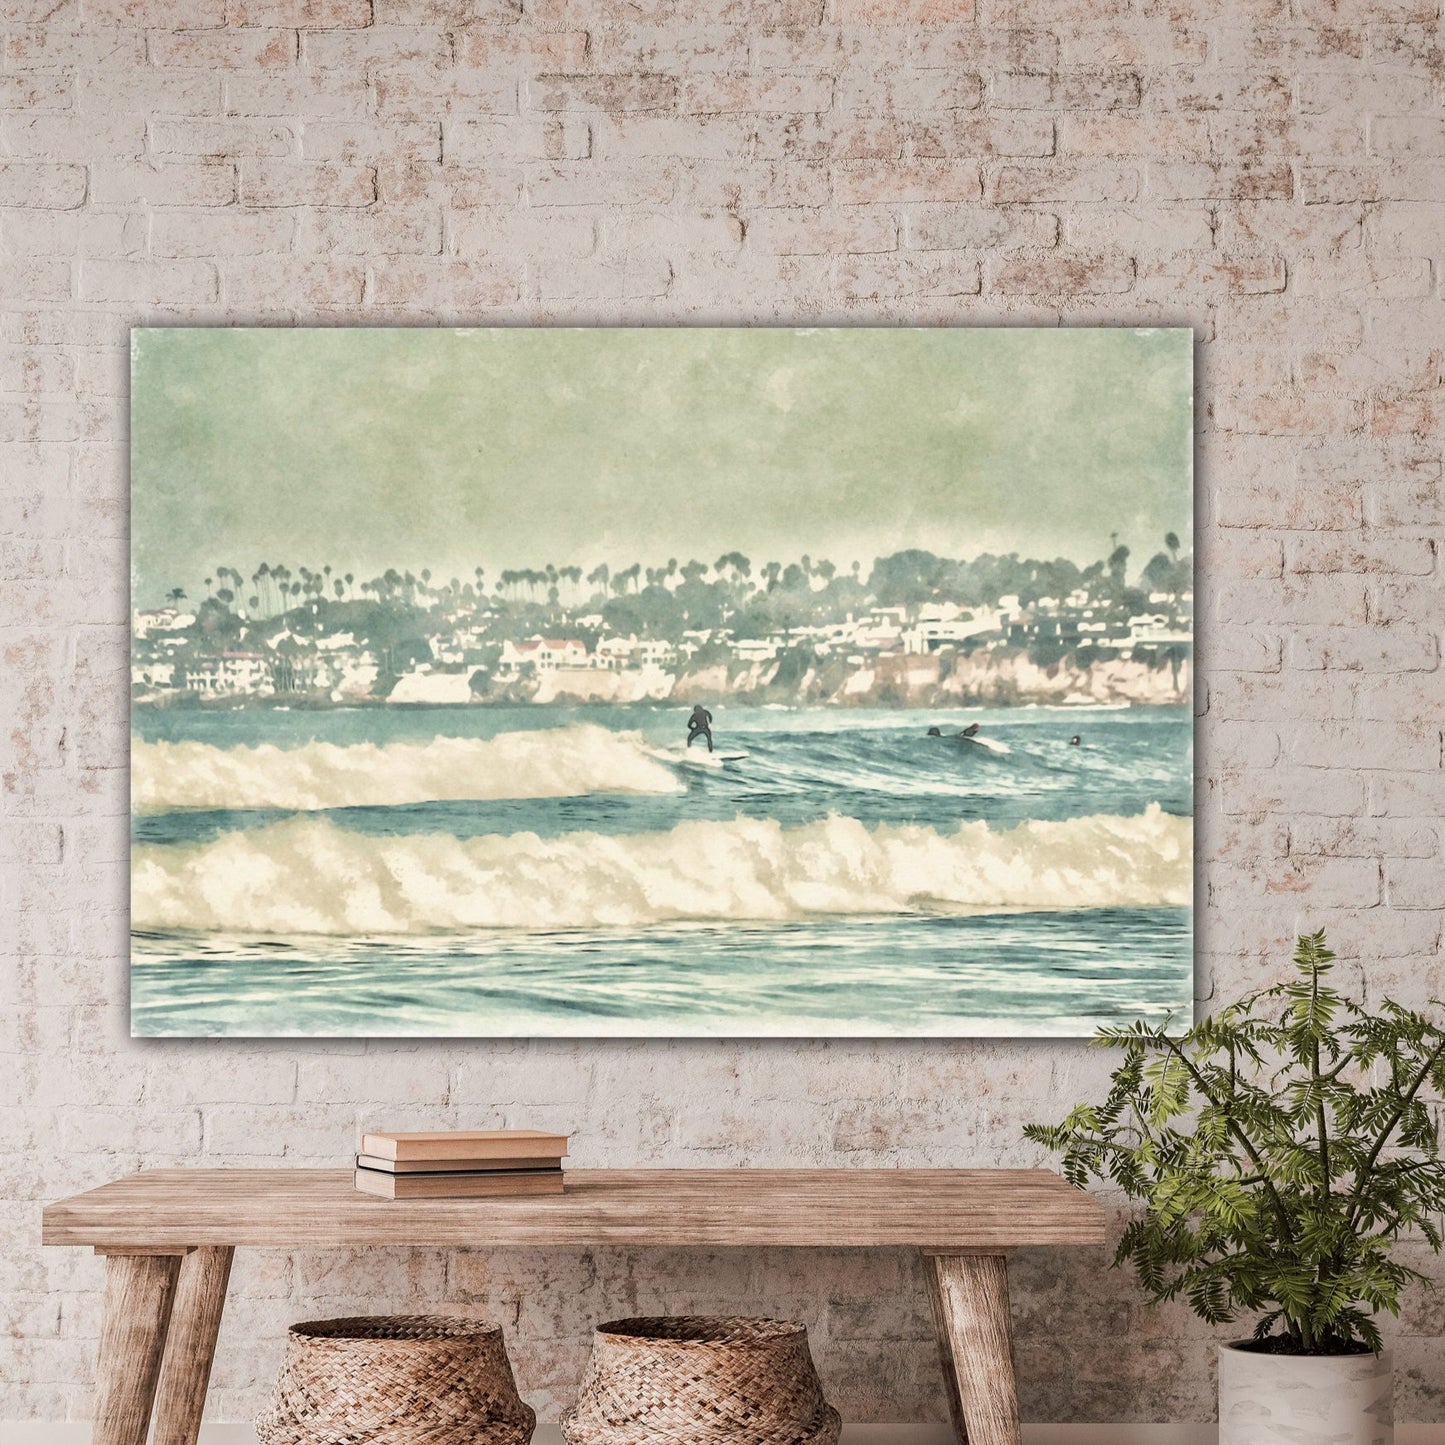 surfing the waves mission beach CA home decor by Jacqueline mb designs